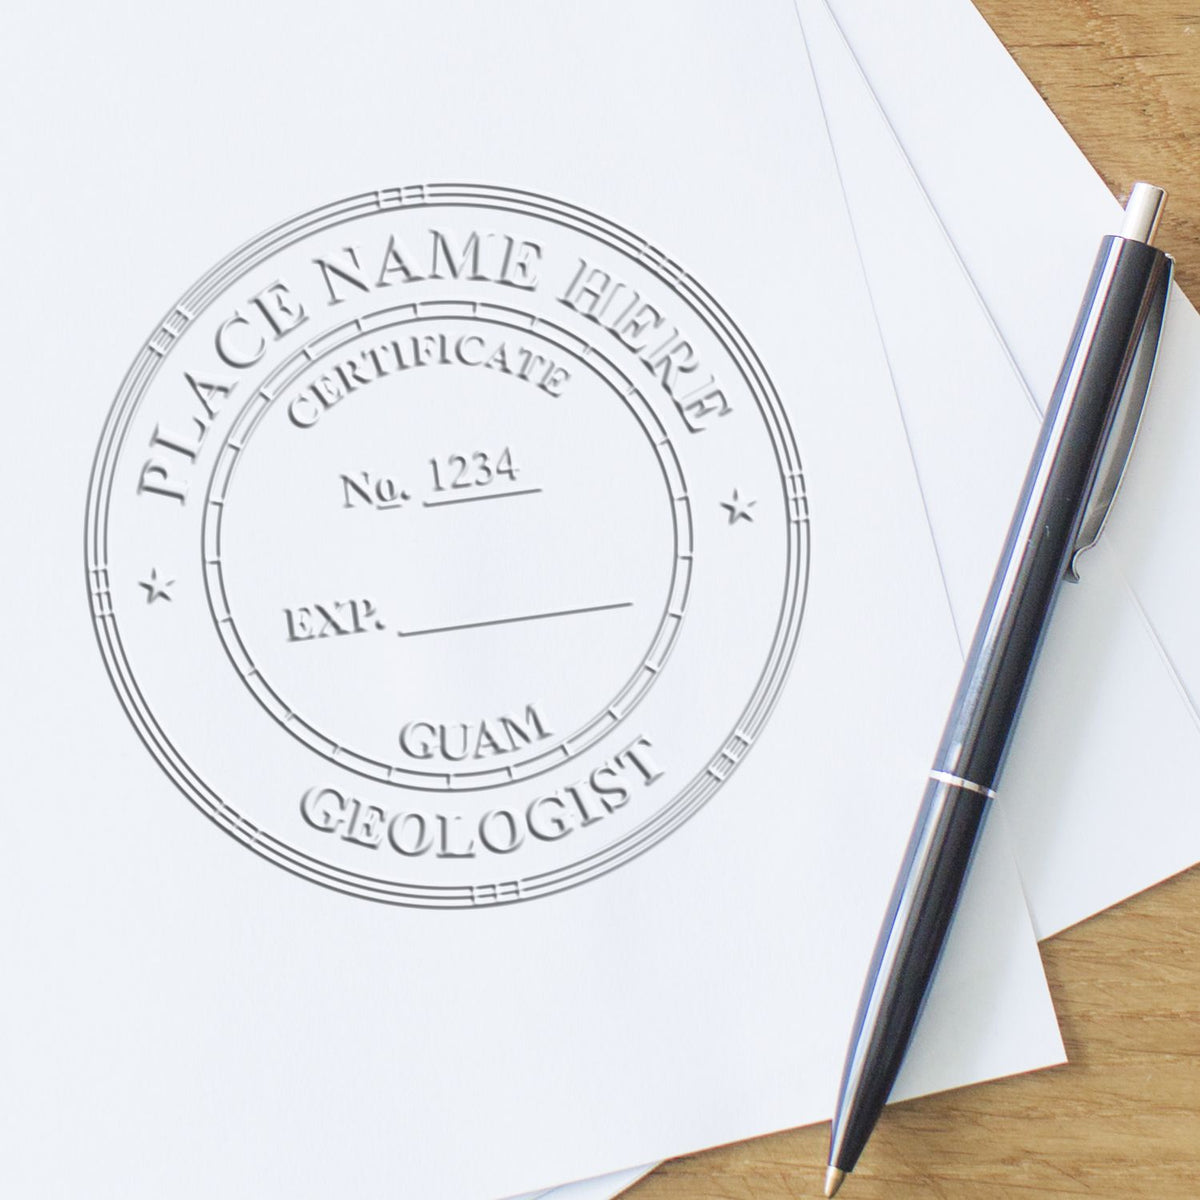 This paper is stamped with a sample imprint of the Long Reach Guam Geology Seal, signifying its quality and reliability.